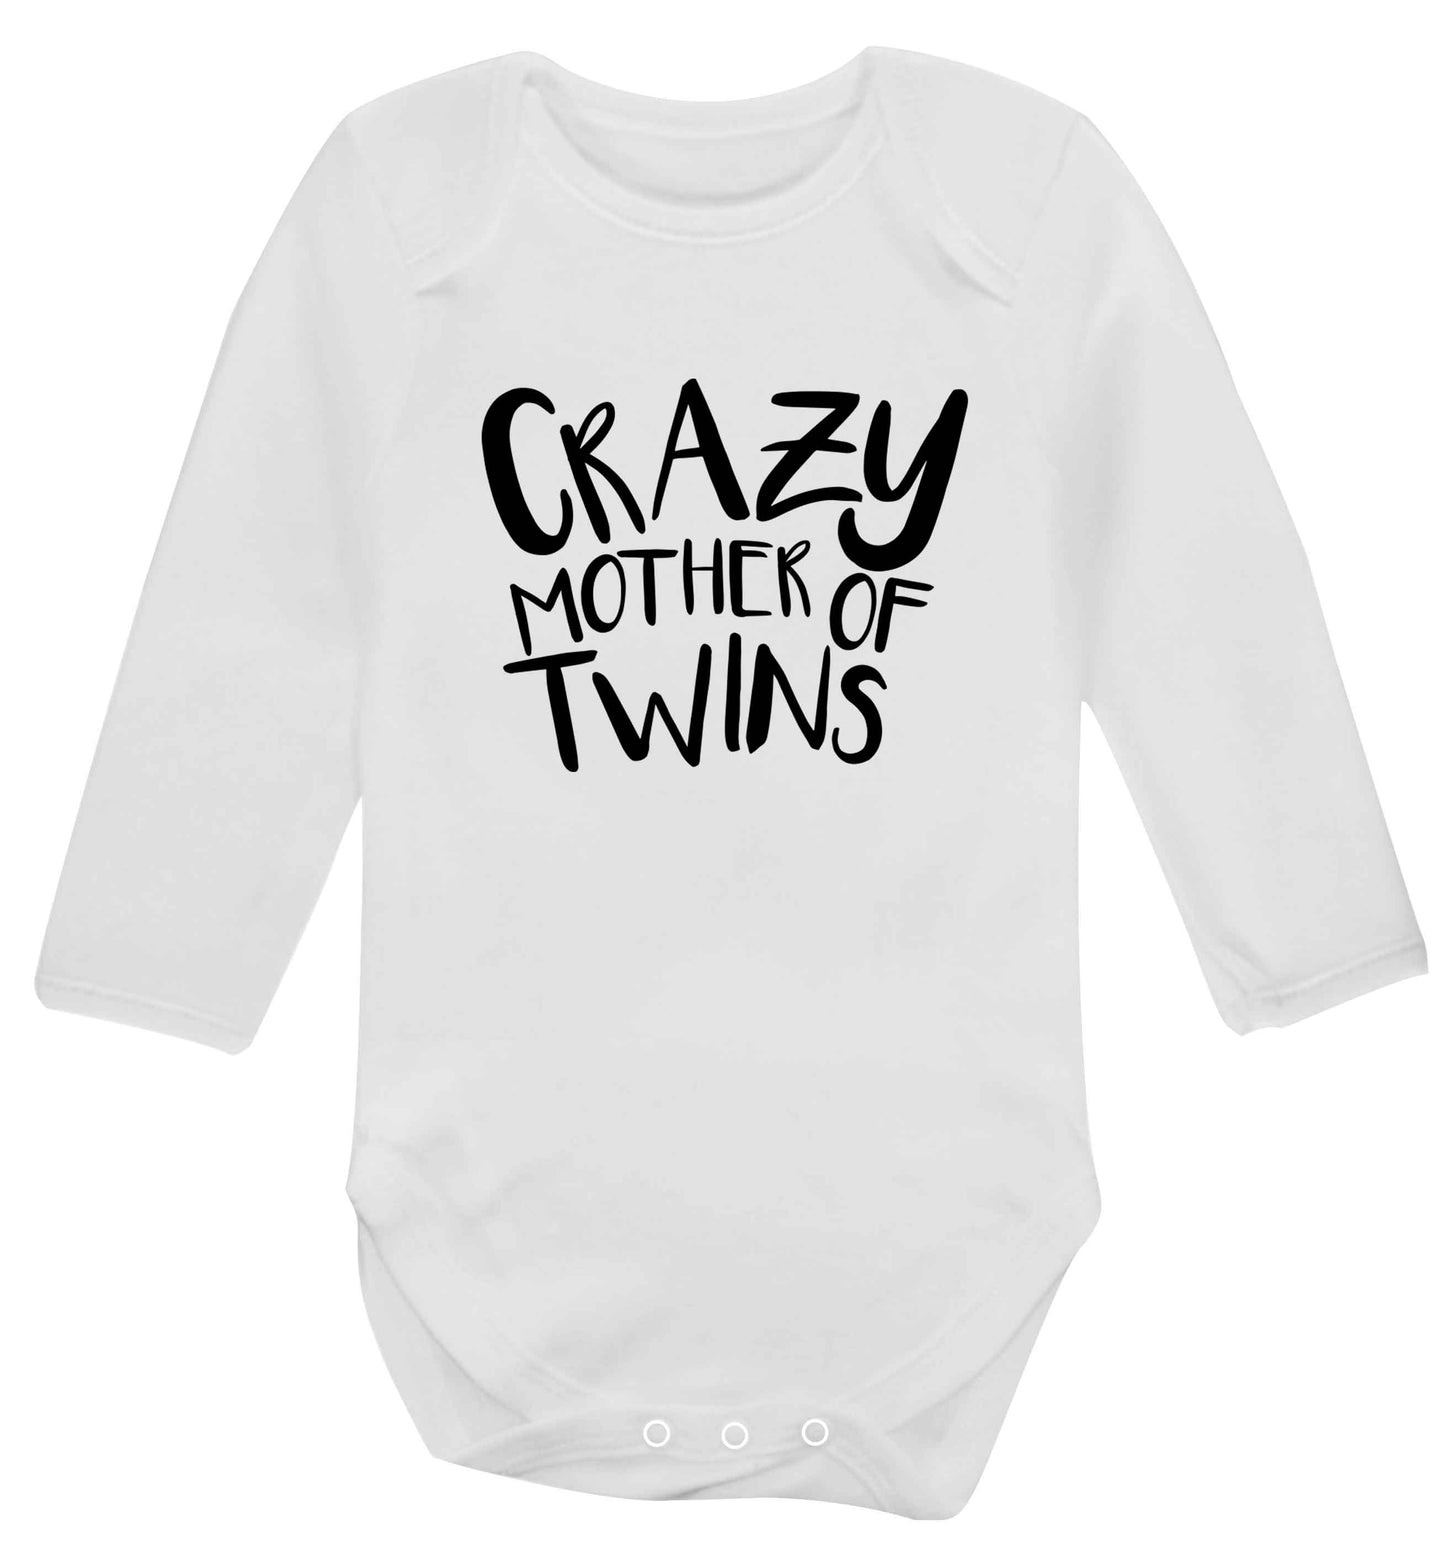 Crazy mother of twins baby vest long sleeved white 6-12 months